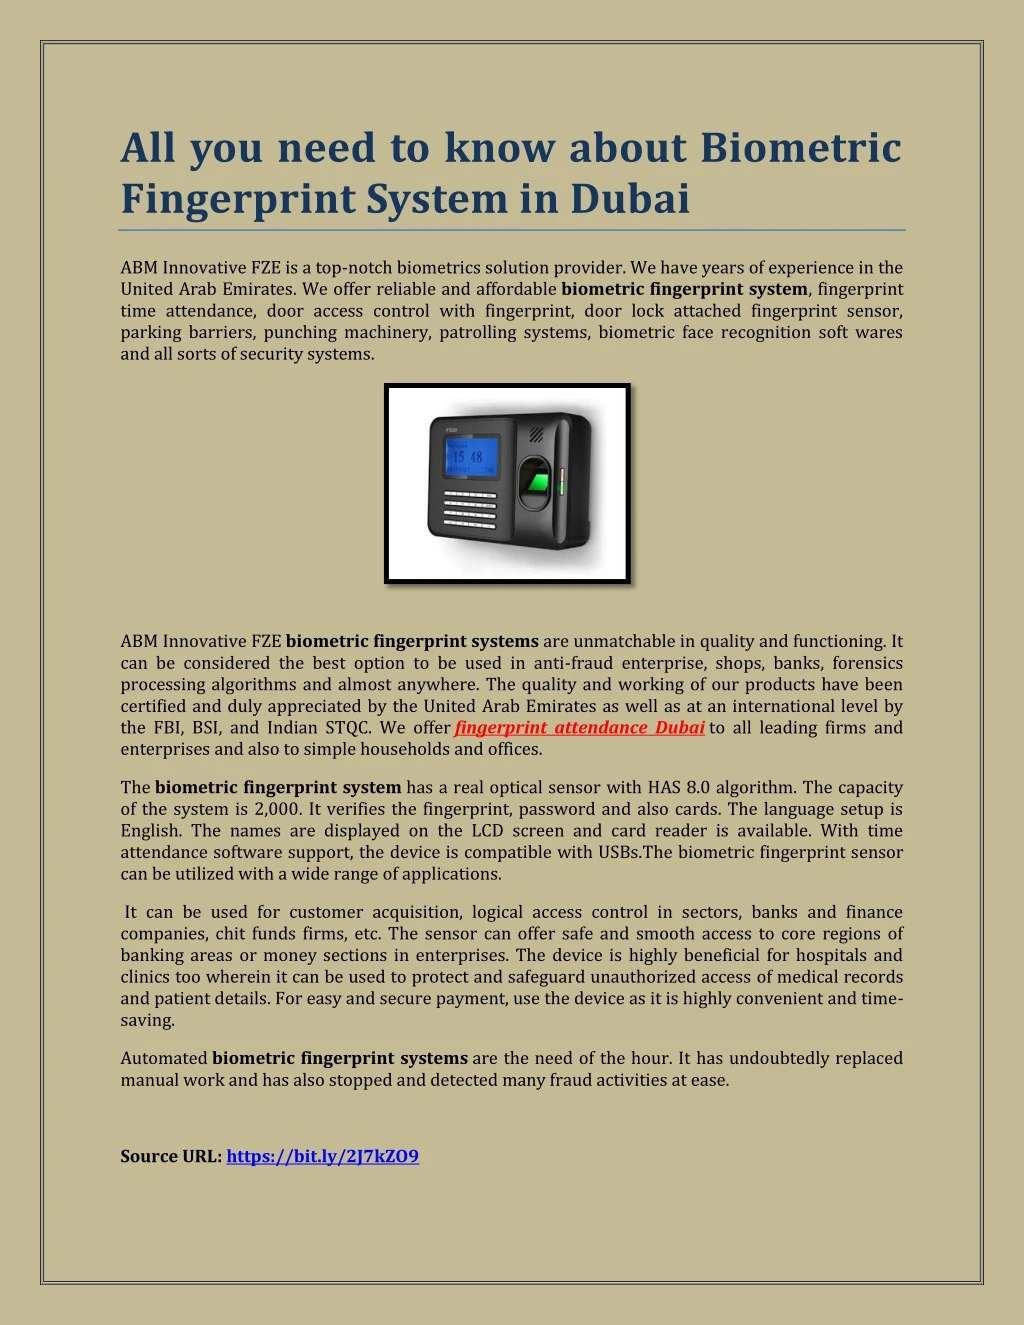 all you need to know about biometric fingerprint